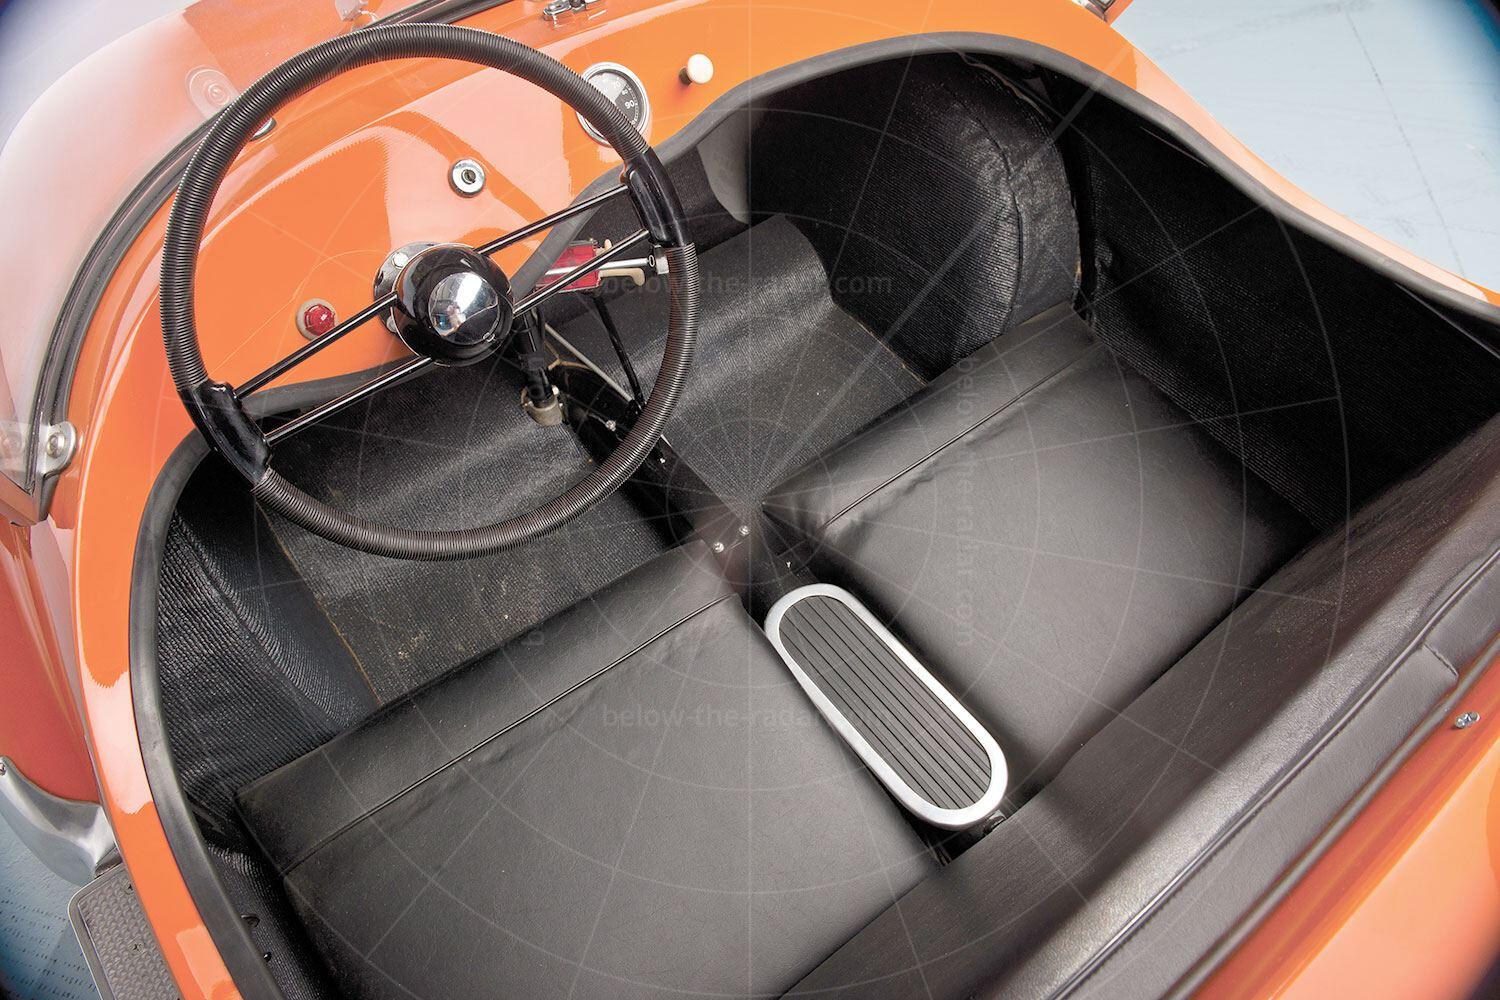 Avolette Record Deluxe interior Pic: RM Sotheby's | Avolette Record Deluxe interior